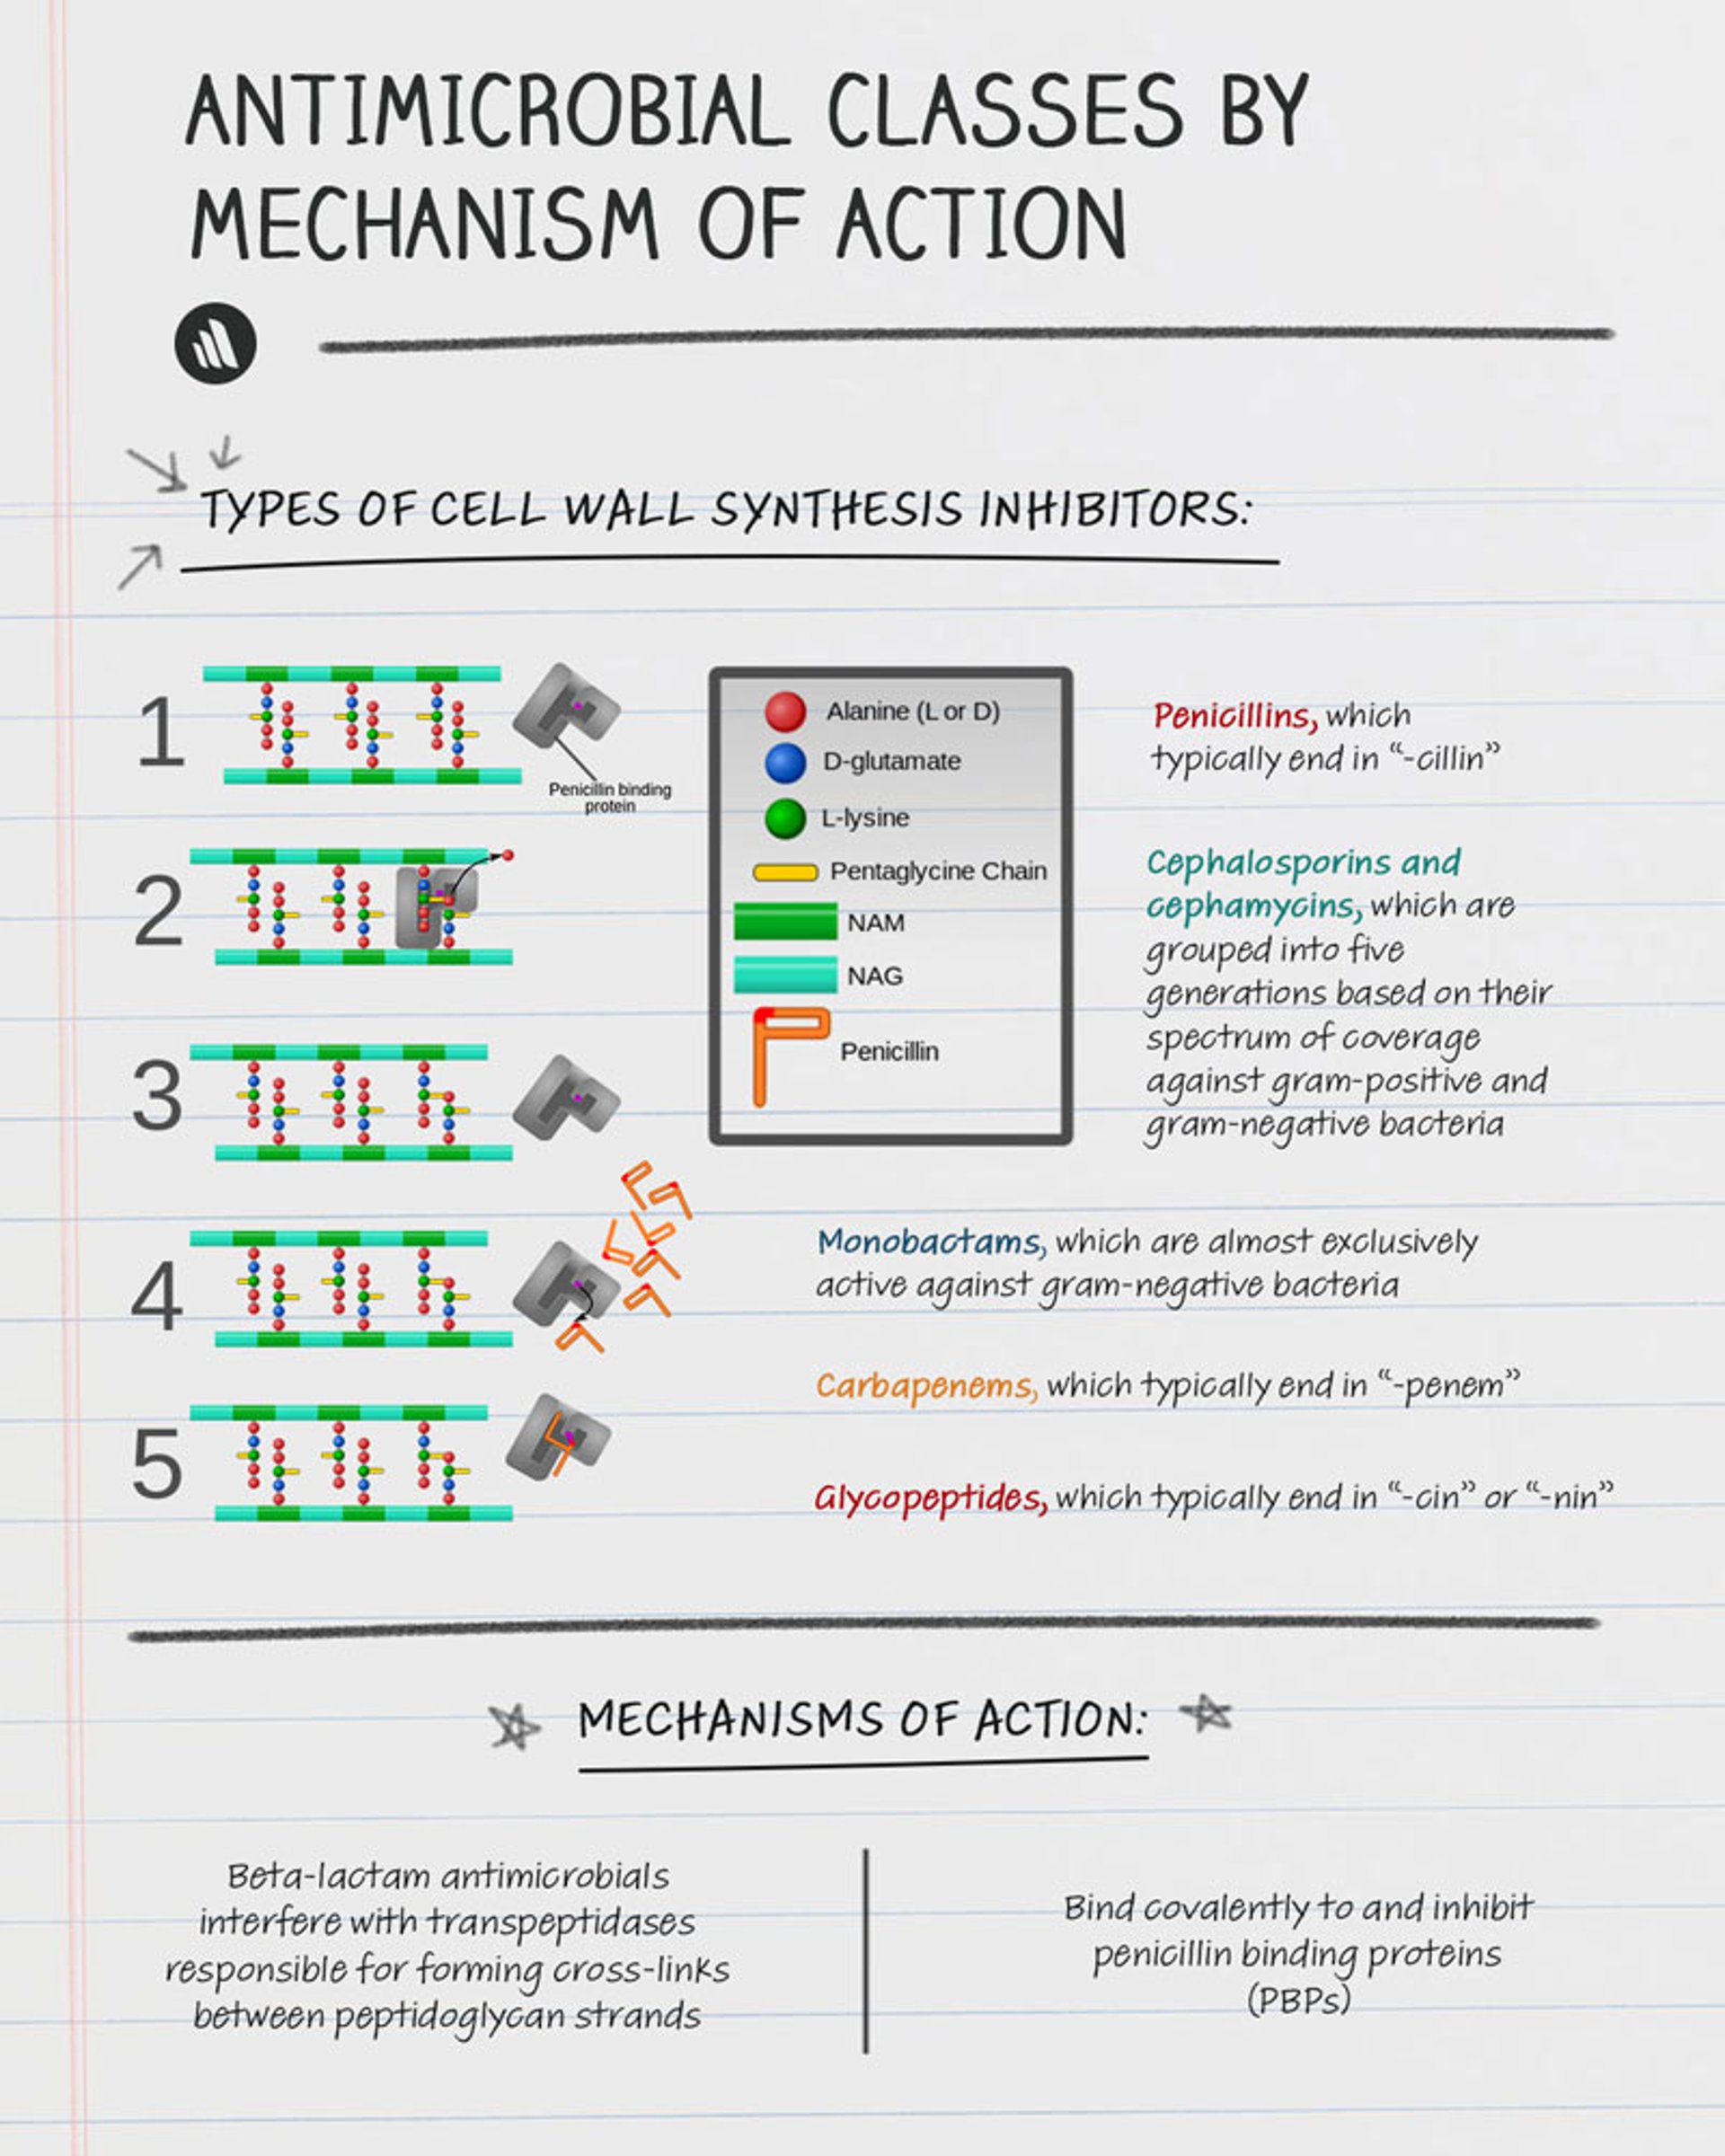 Mechanisms of Action: Cell Wall Synthesis Inhibitors